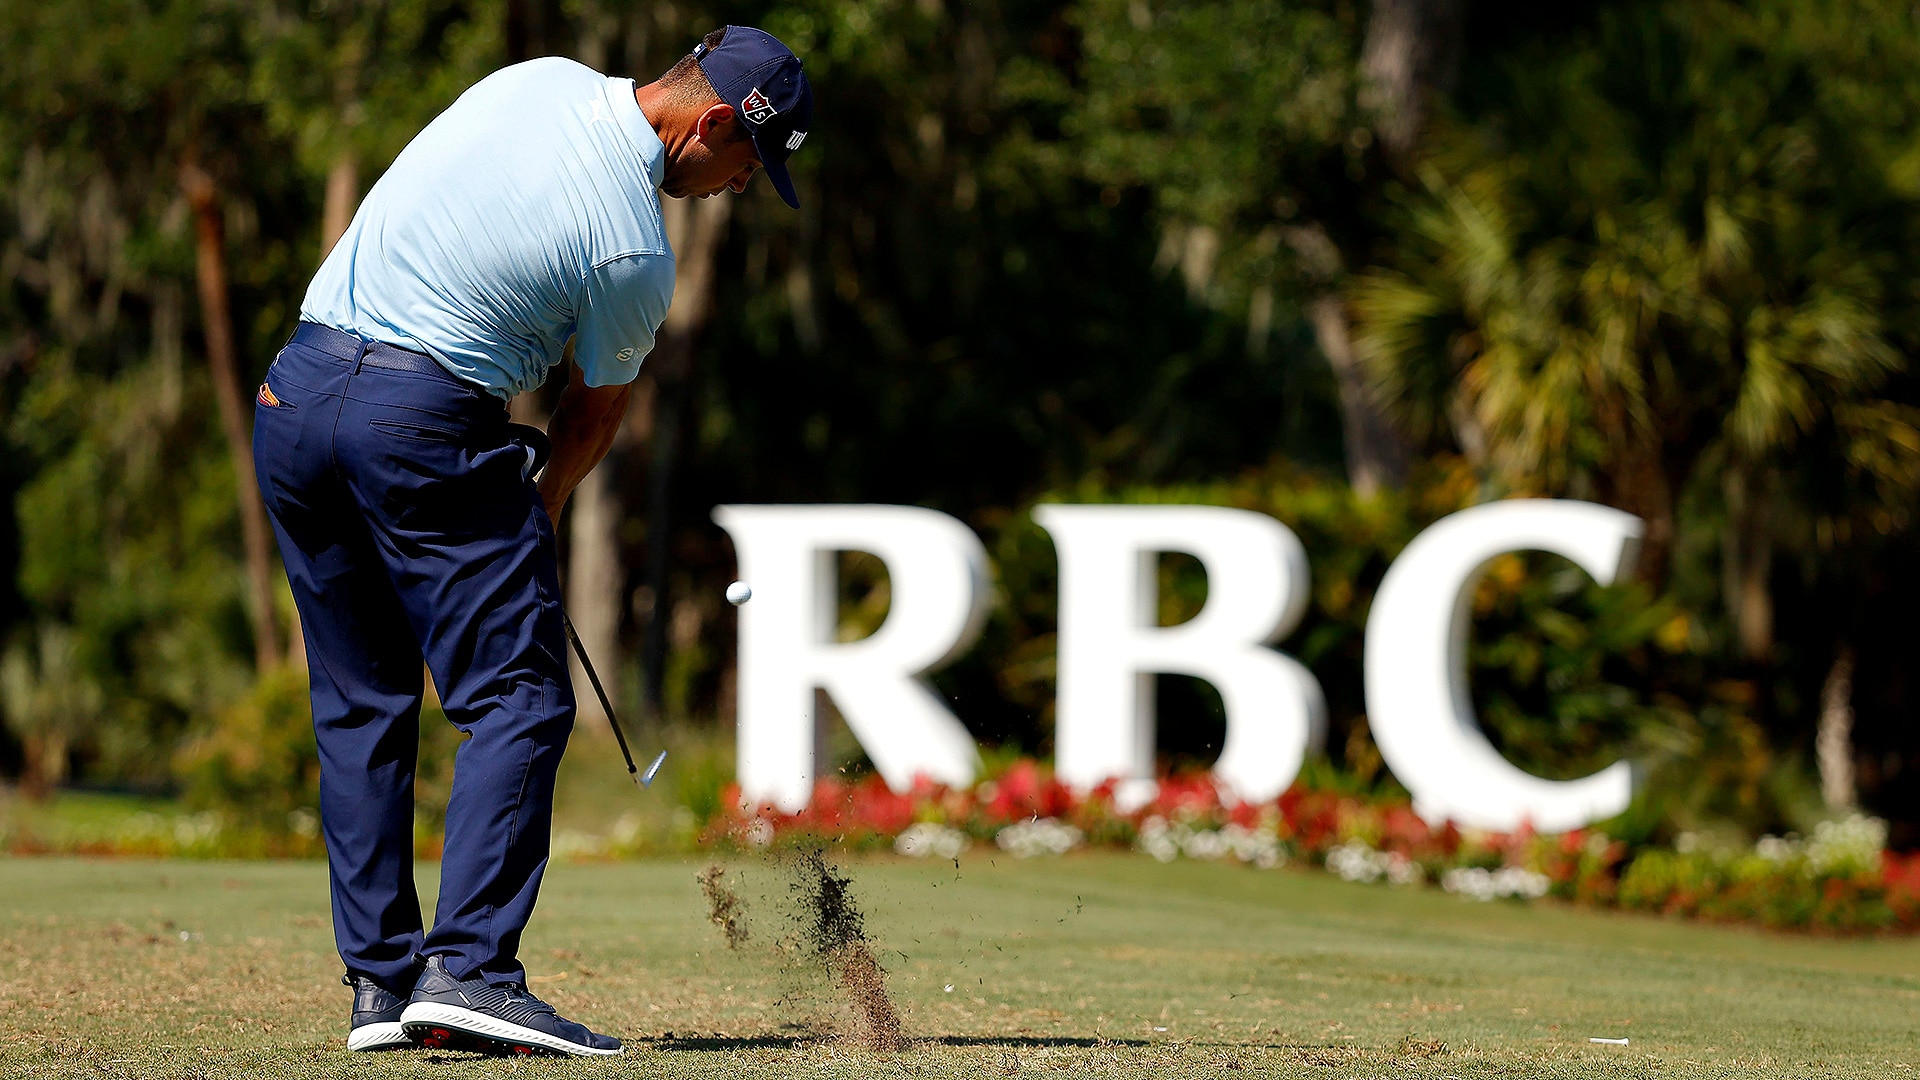 This week in golf (April 12-18): TV times, tee times for RBC Heritage, LPGA’s Lotte